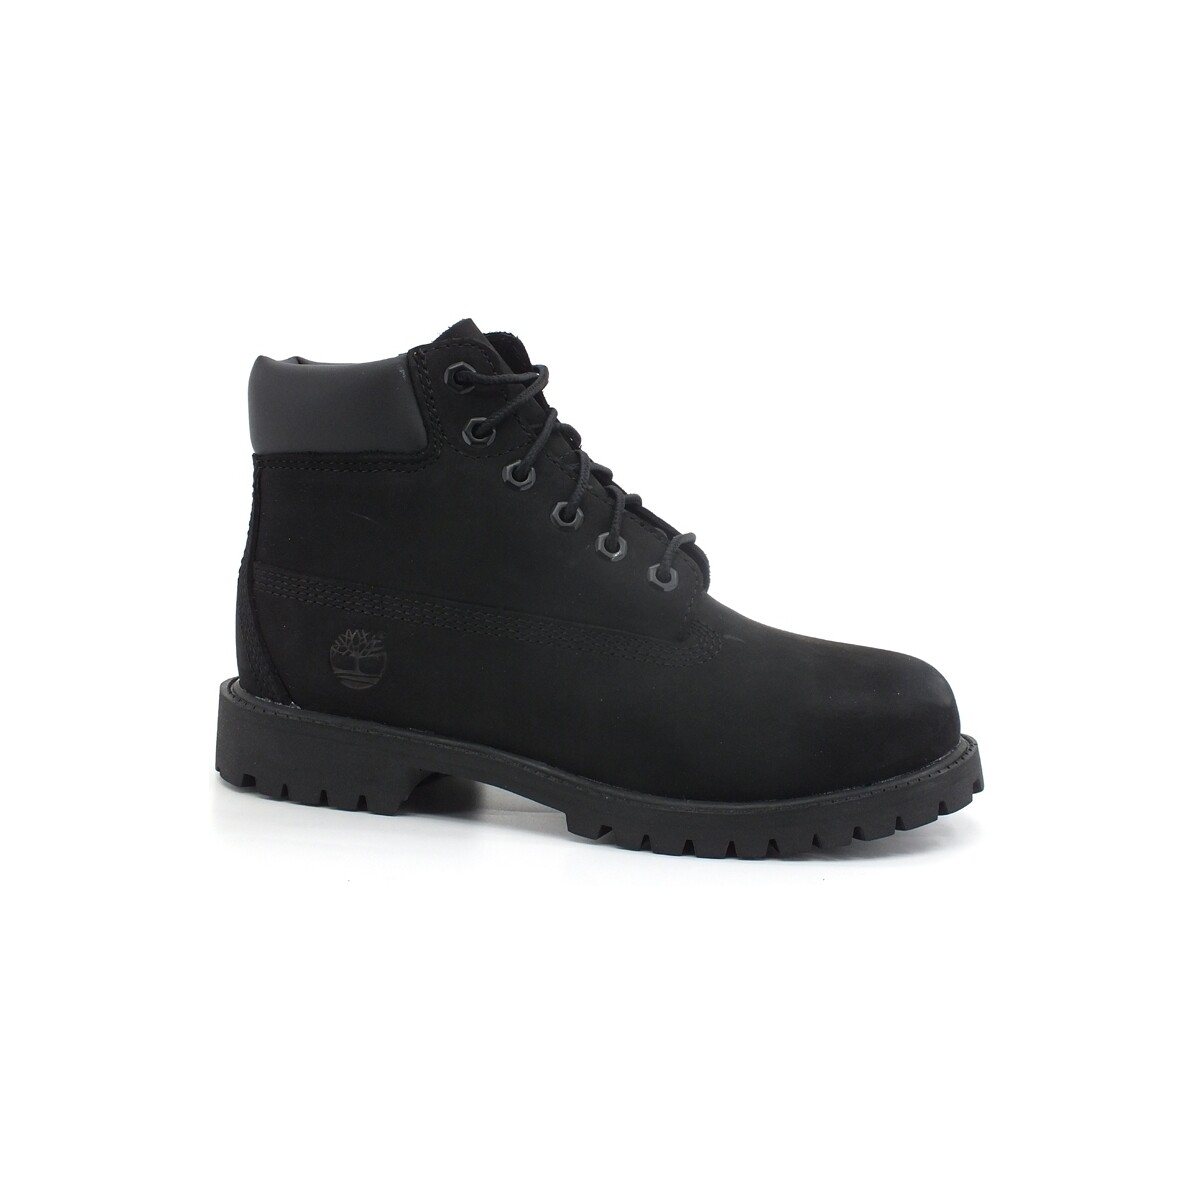 Chaussures Fille Multisport Timberland Stivaletto Polacco Waterproof Black TB012907 Noir